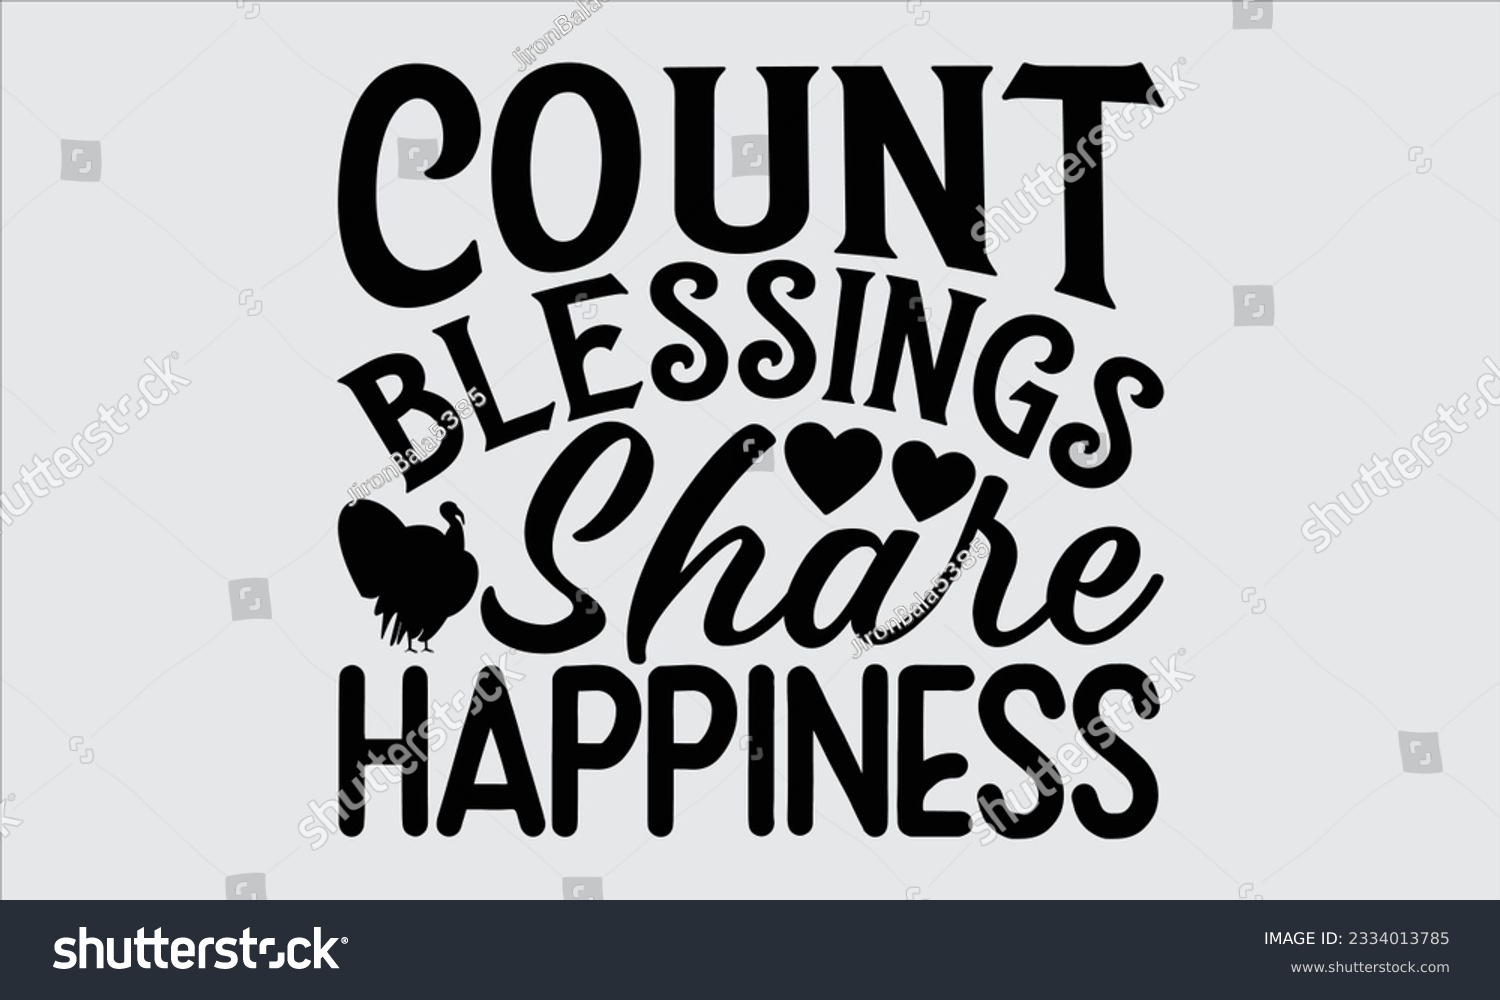 SVG of Count Blessings Share Happiness - Thanksgiving svg typography t-shirt design, this illustration can be used as a print on Stickers, Templates, and bags, stationary or as a poster.
 svg